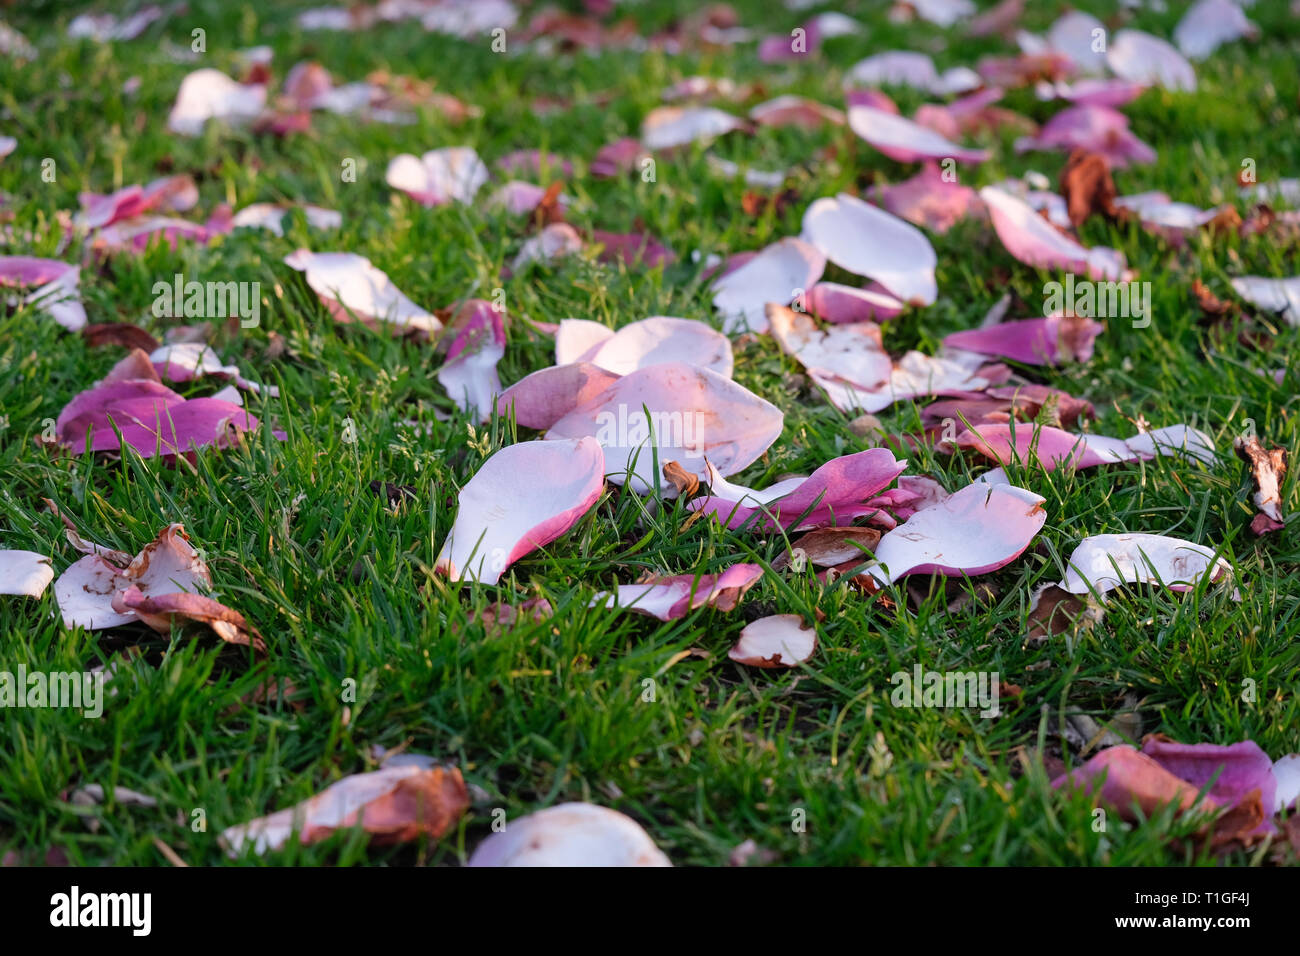 Pink magnolia tree petals lying on grass after falling from the tree. Stock Photo